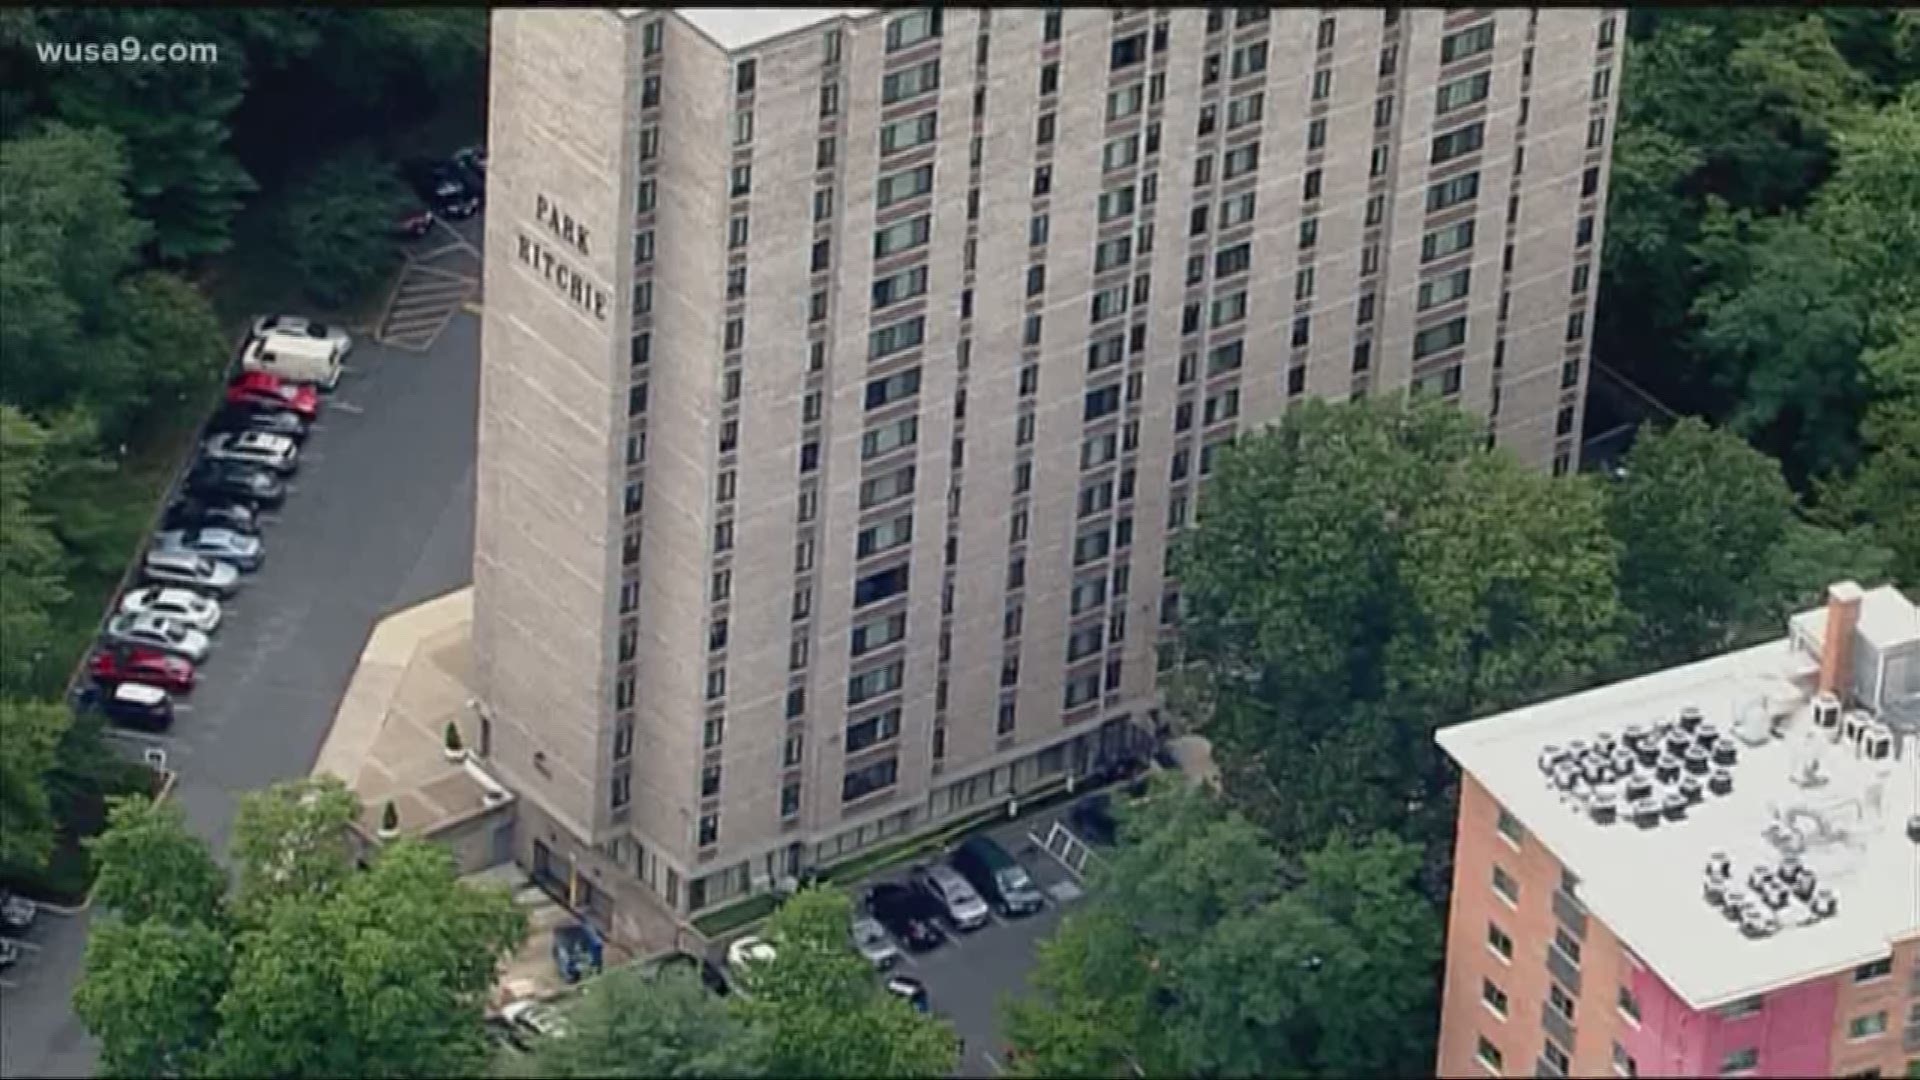 We now know what happened when a 2-year-old boy miraculously survived falling from an 11th floor window. Officials in Takoma Park are calling it an accident, after the little boy pushed through the window screen after a nap.